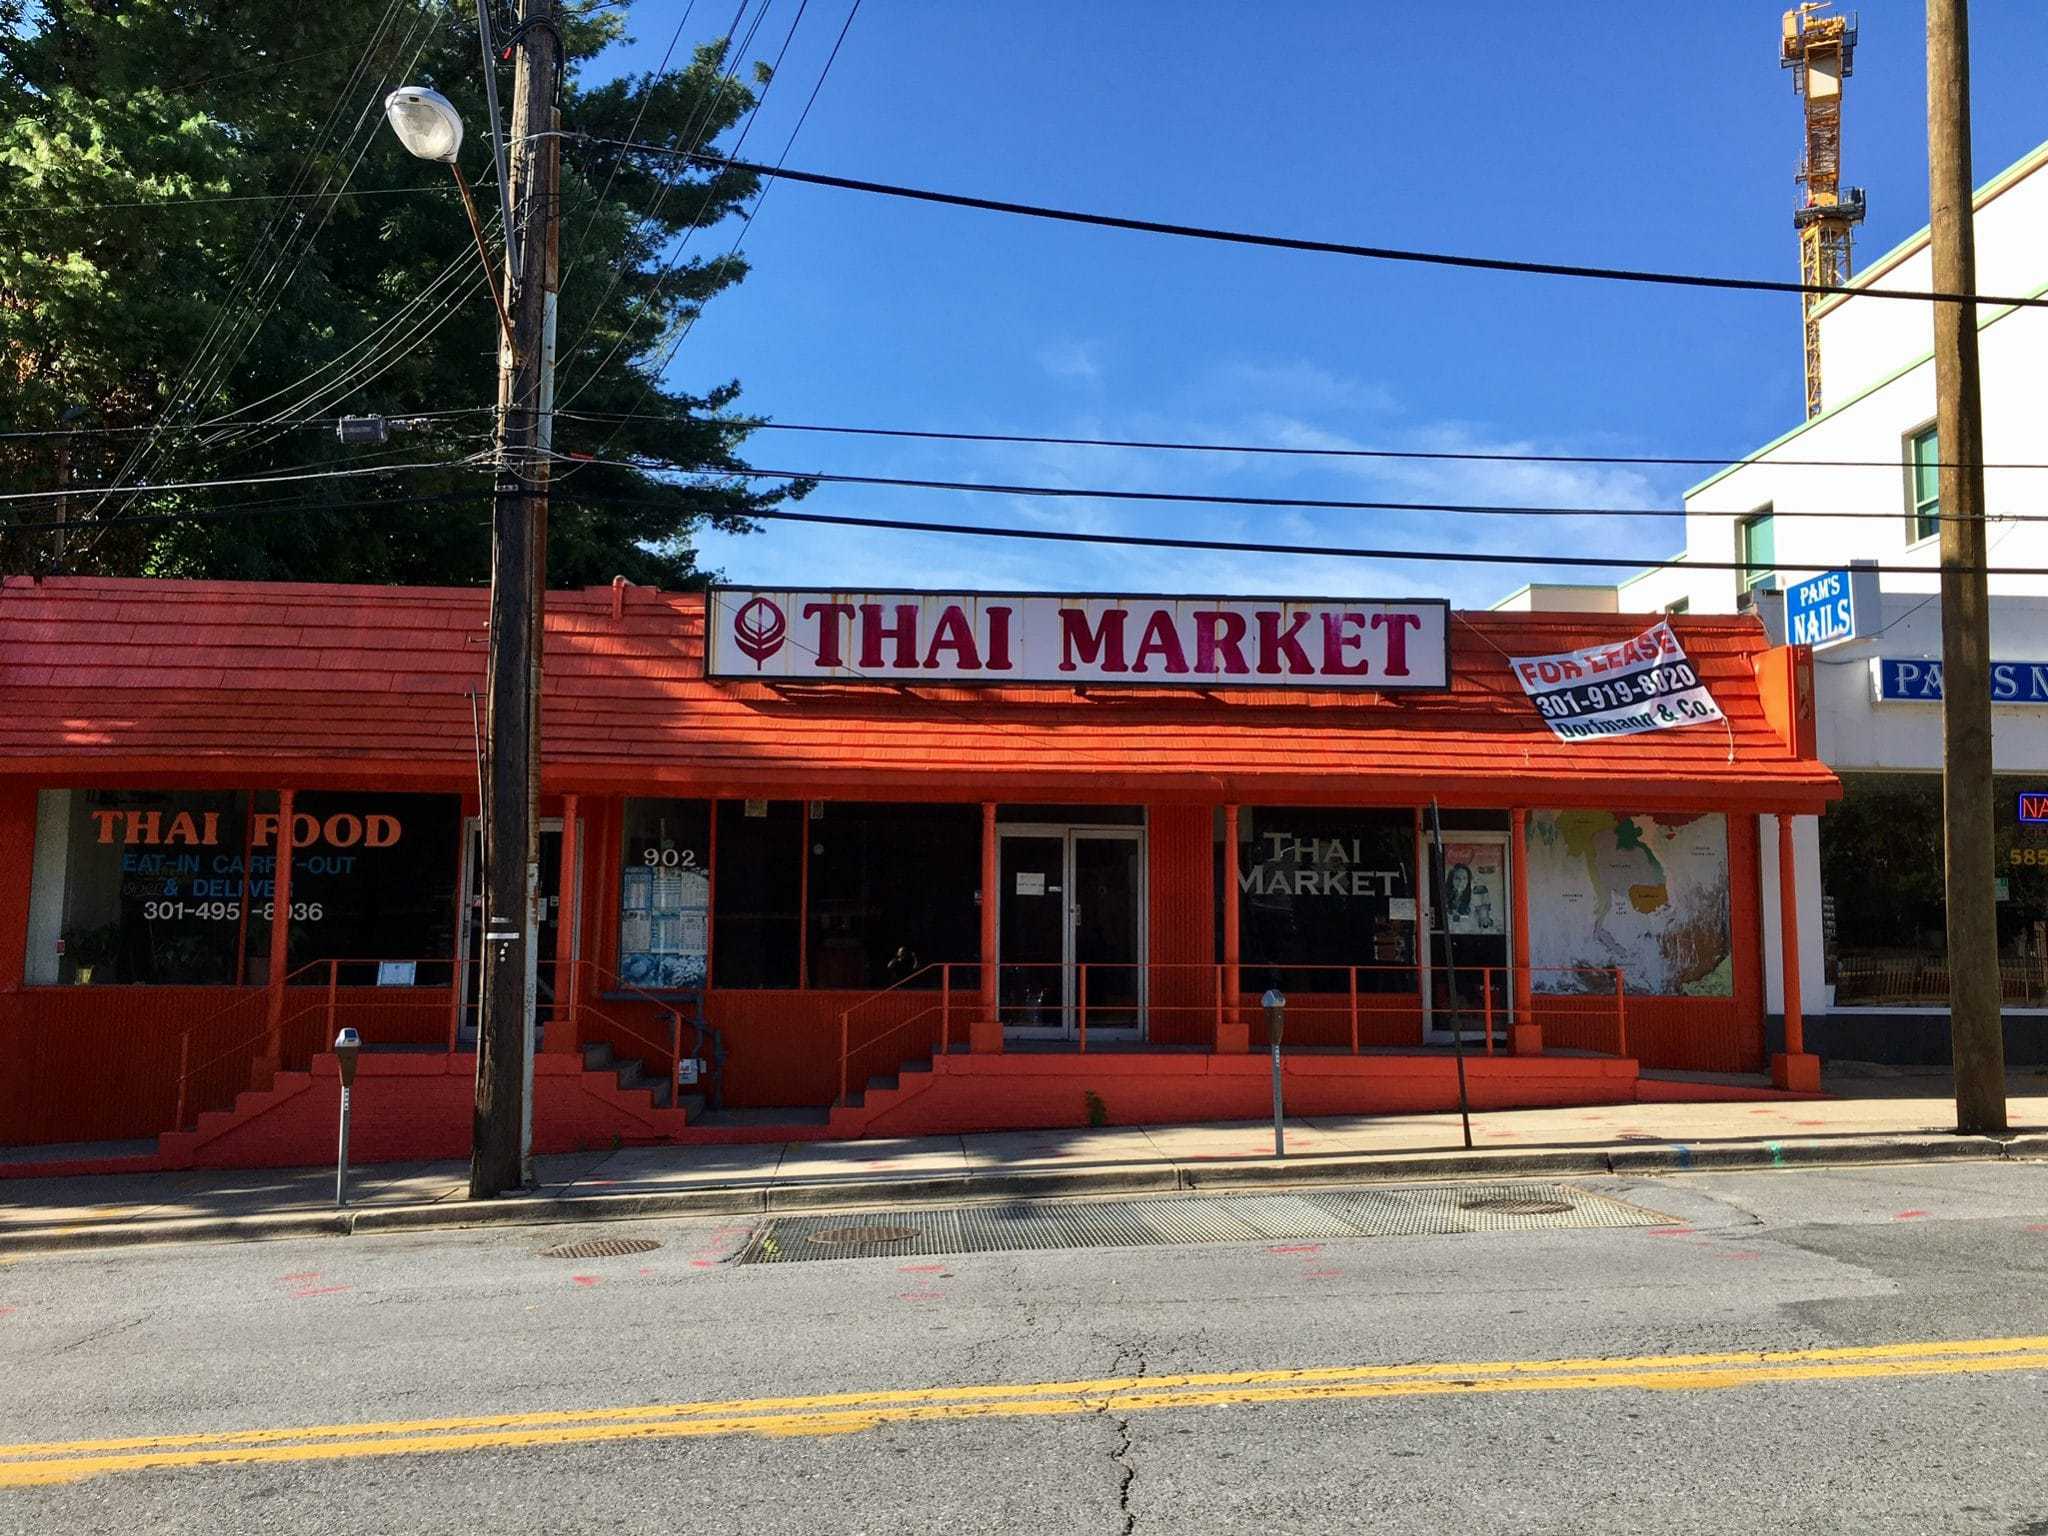 Thai Market Closed; Restaurant Closed for Remodeling